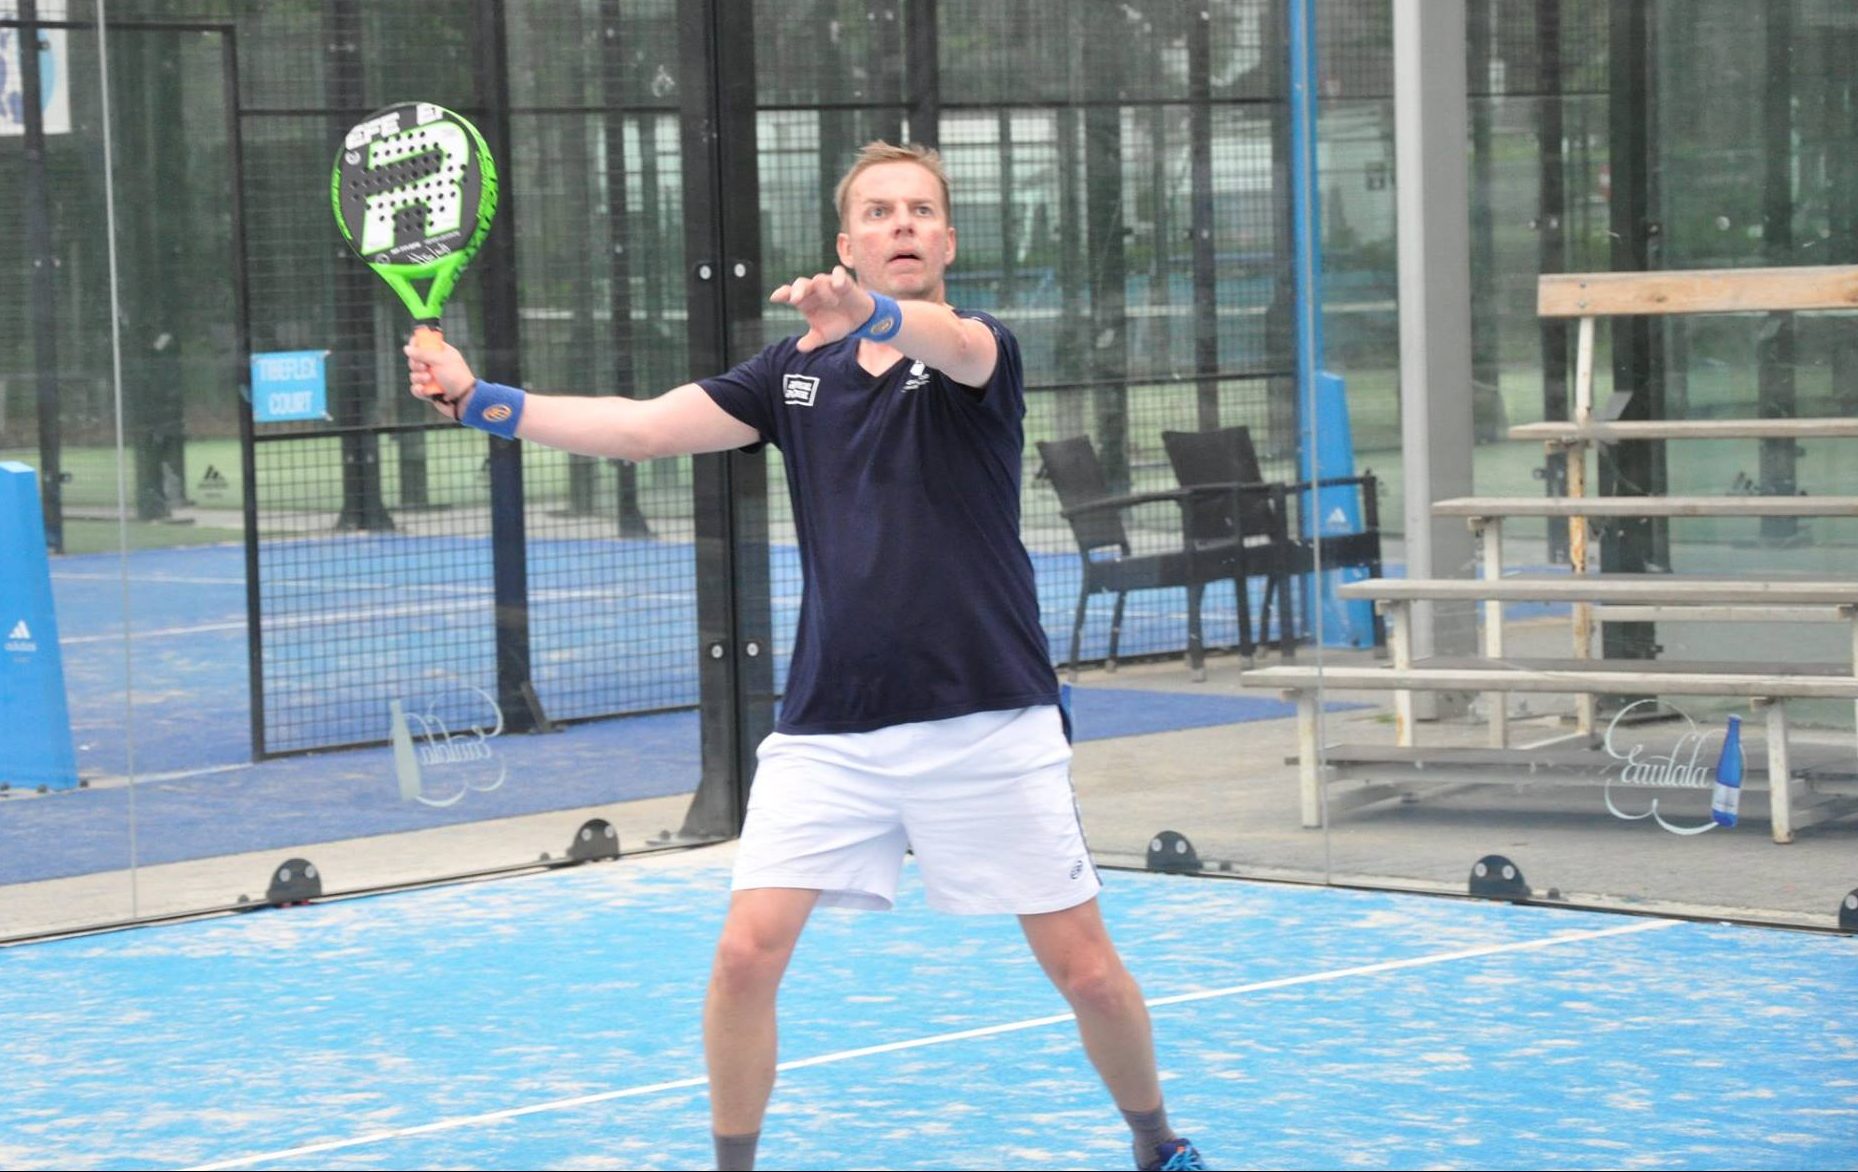 Philippe Werts - 3 million potential viewers on TV for padel